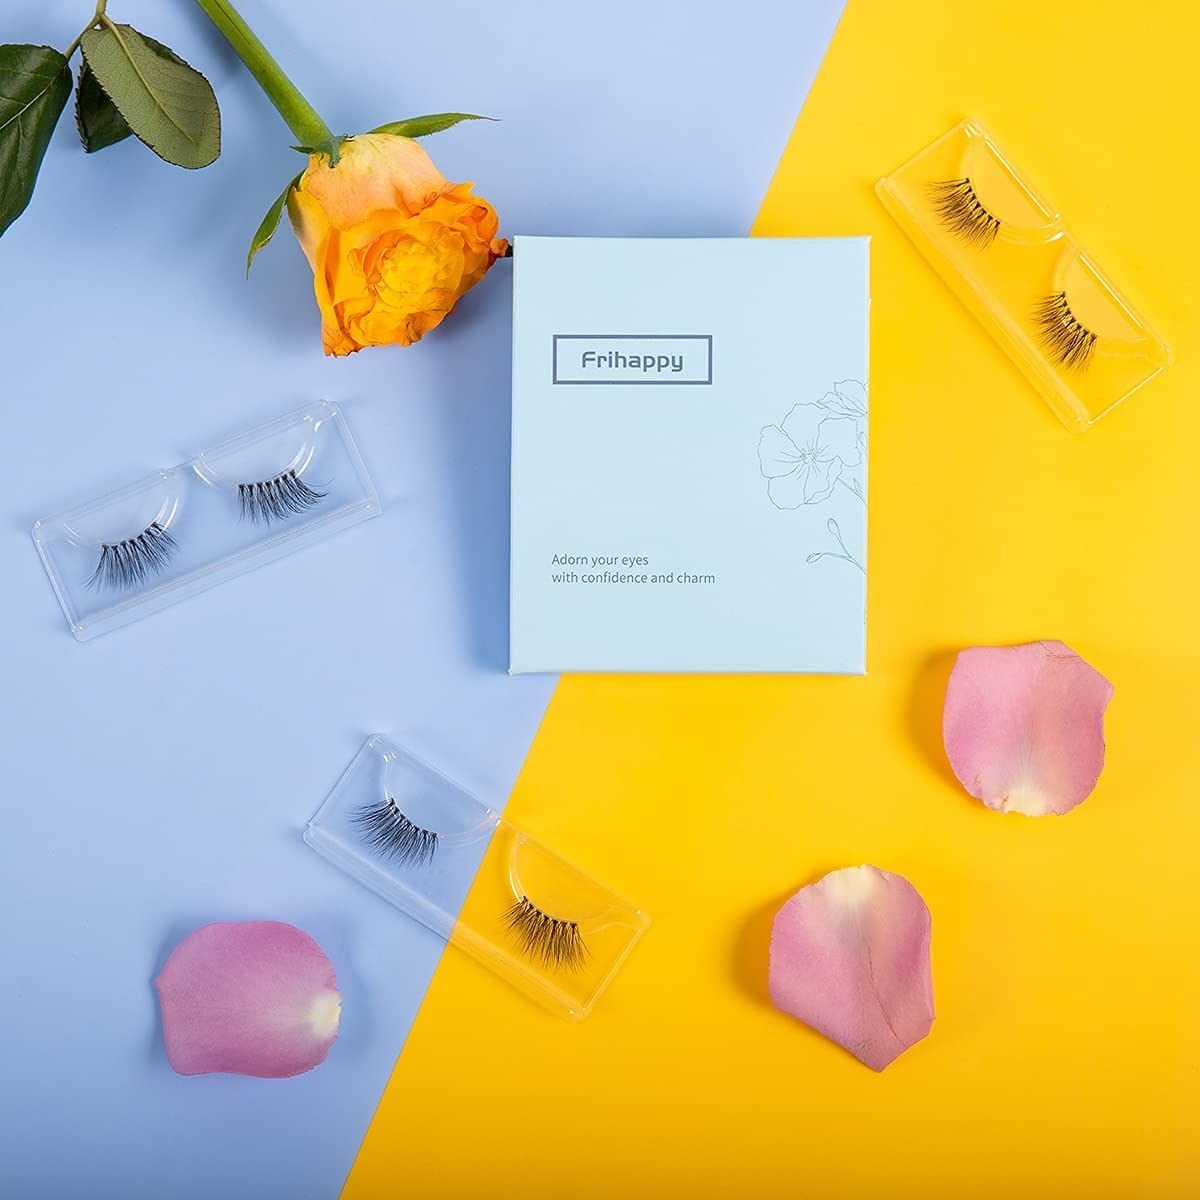 The pack of lashes surrounded by lashes and flower petals